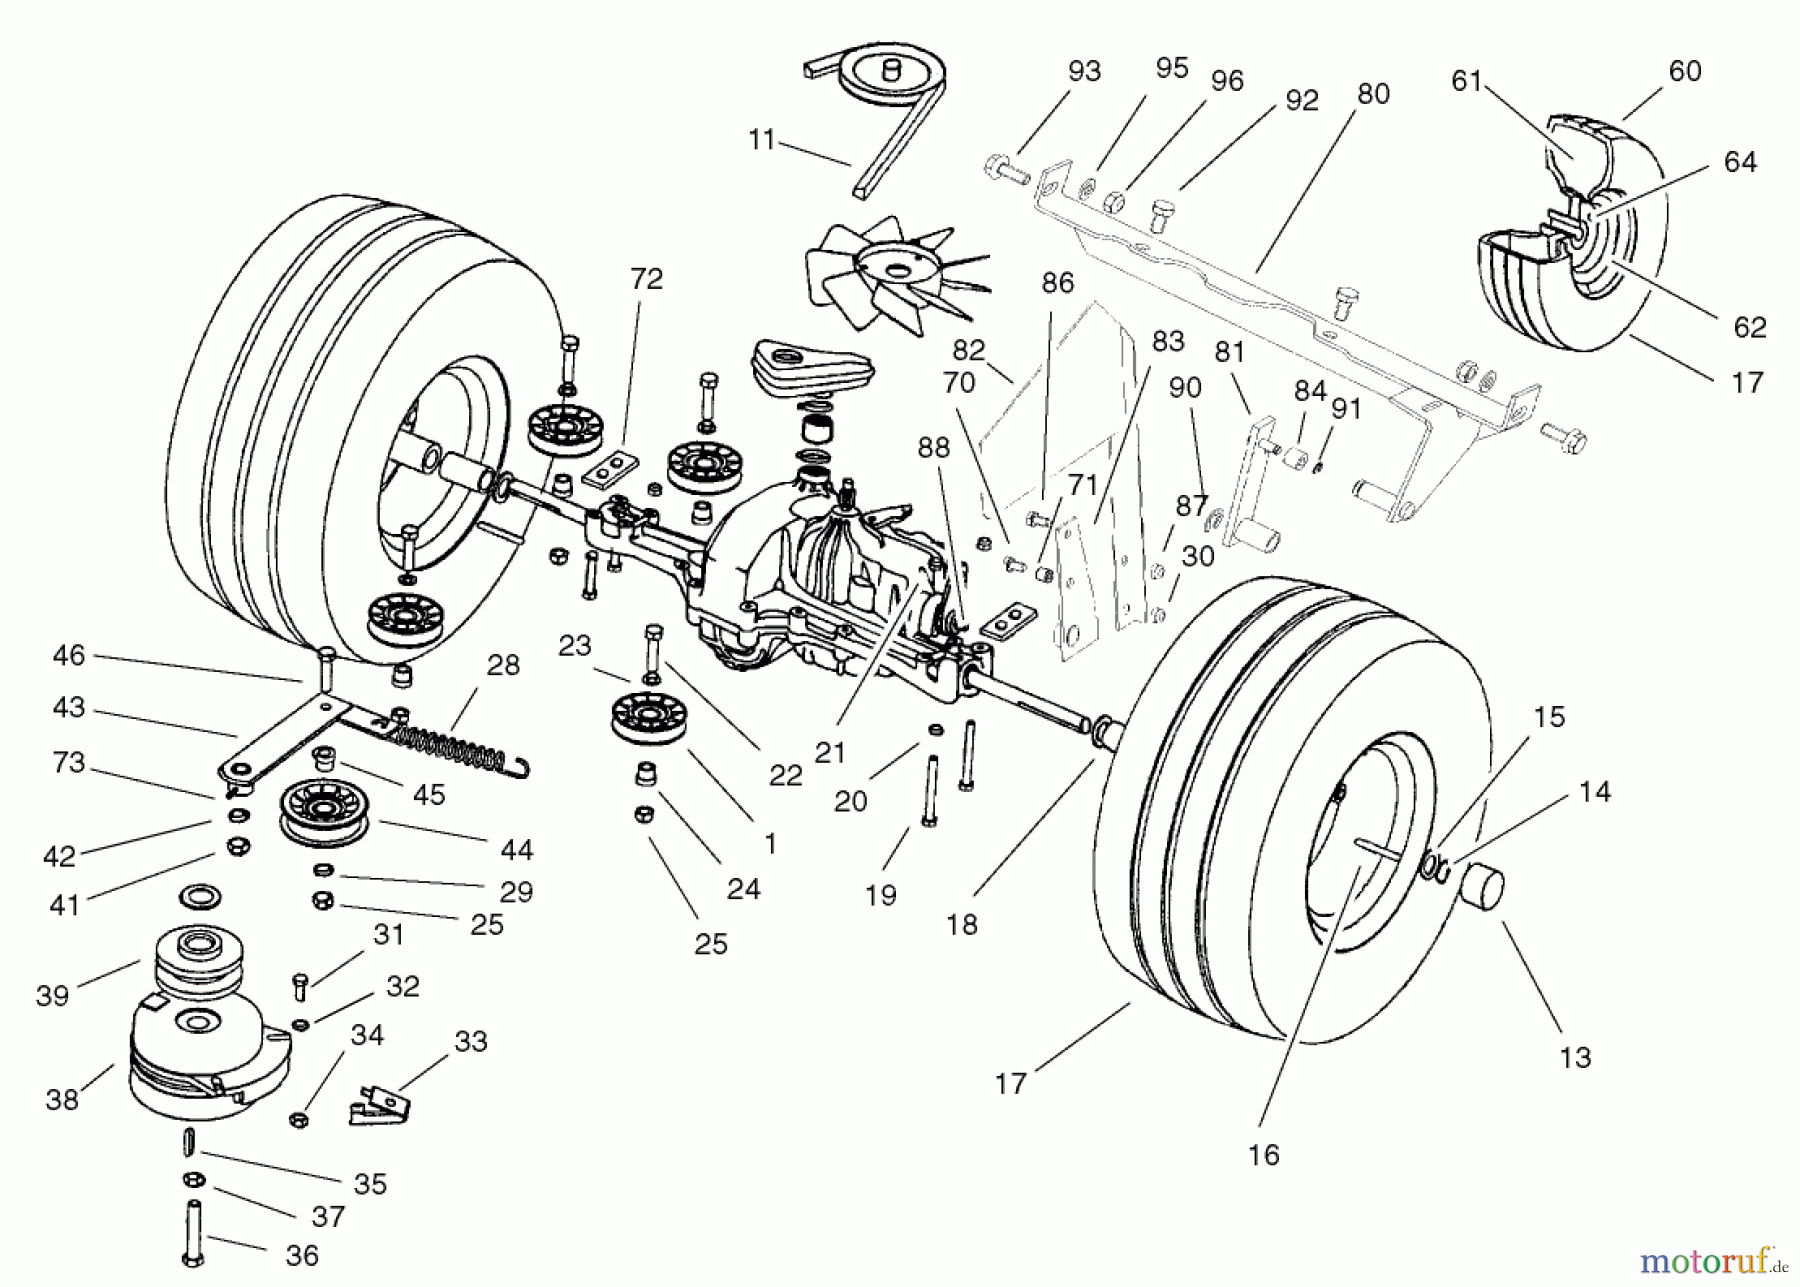  Toro Neu Mowers, Lawn & Garden Tractor Seite 1 74590 (190-DH) - Toro 190-DH Lawn Tractor, 2001 (210000001-210999999) TRANSMISSION DRIVE ASSEMBLY